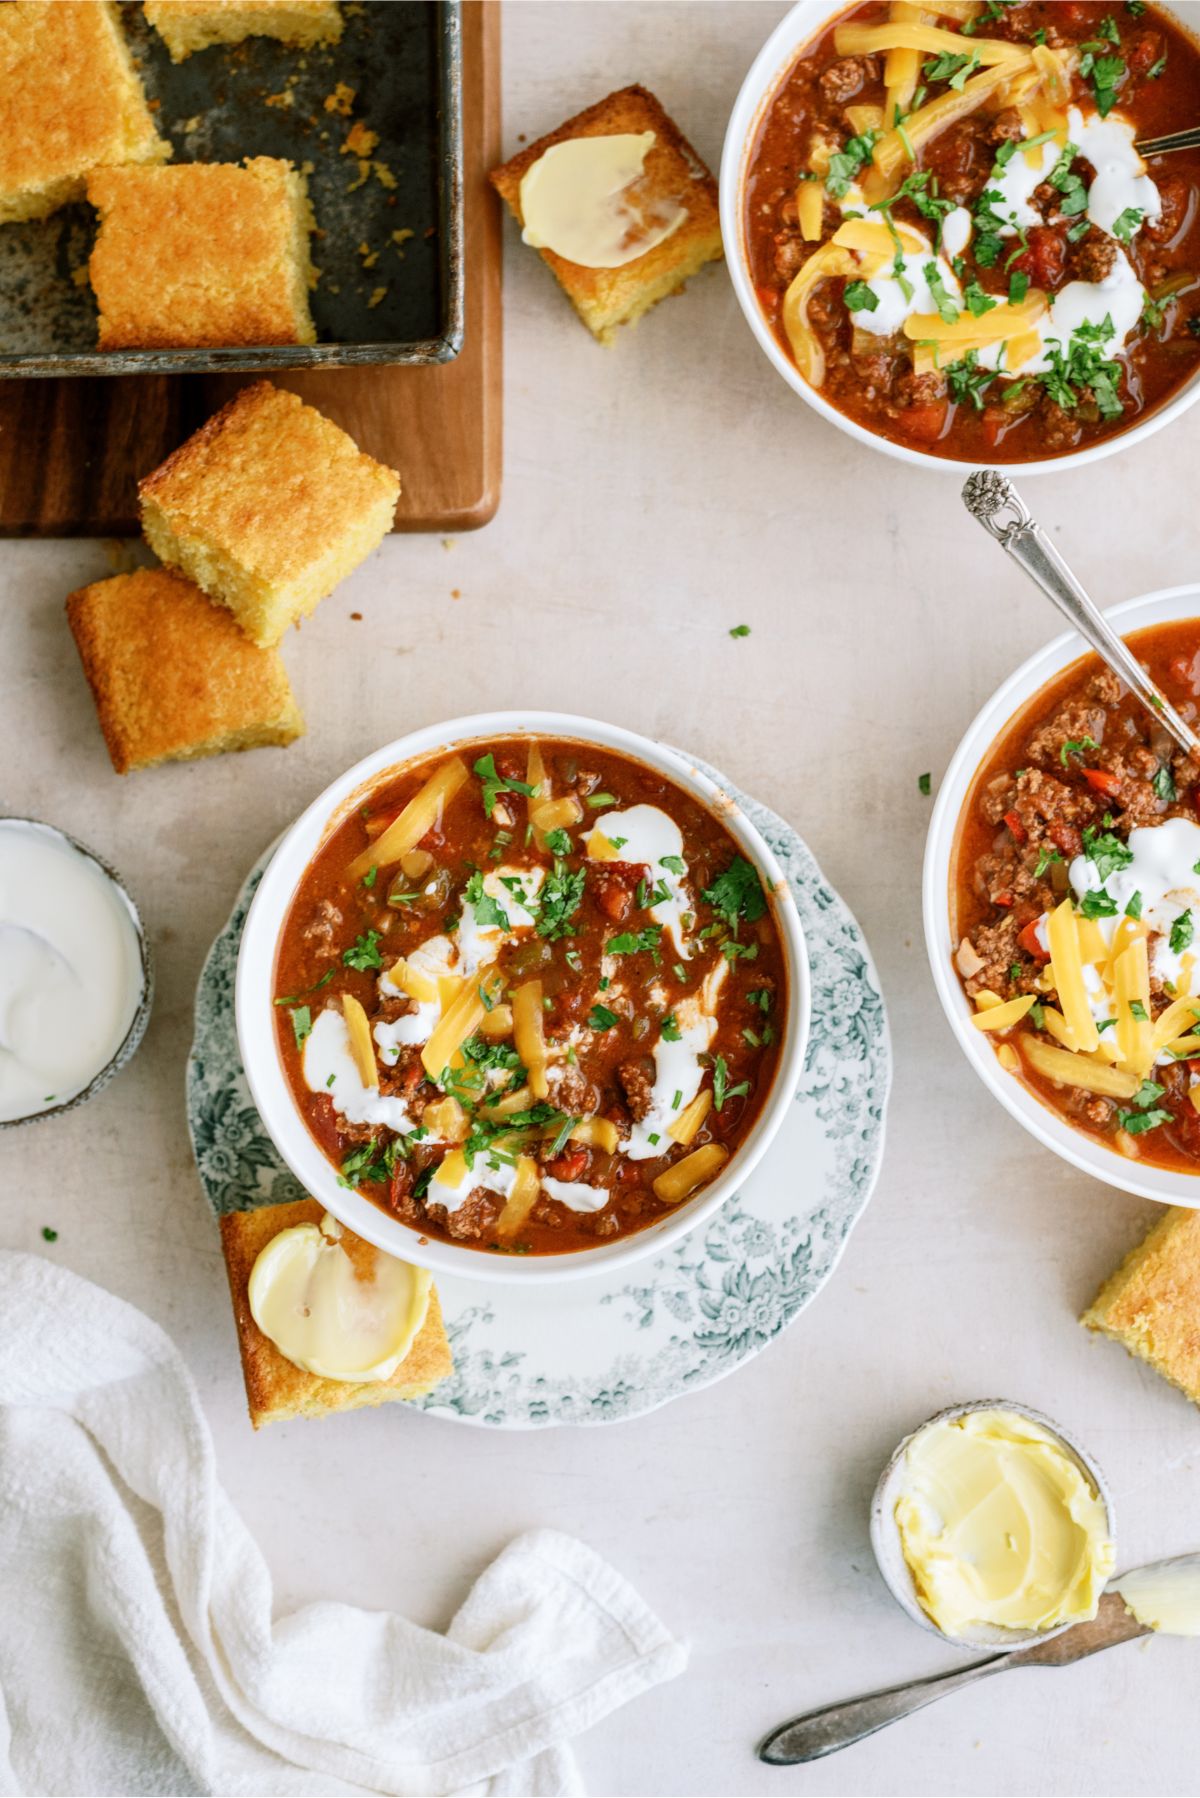 Top view of 3 bowls of Instant Pot No-Bean Chili with Ground Beef with corn bread